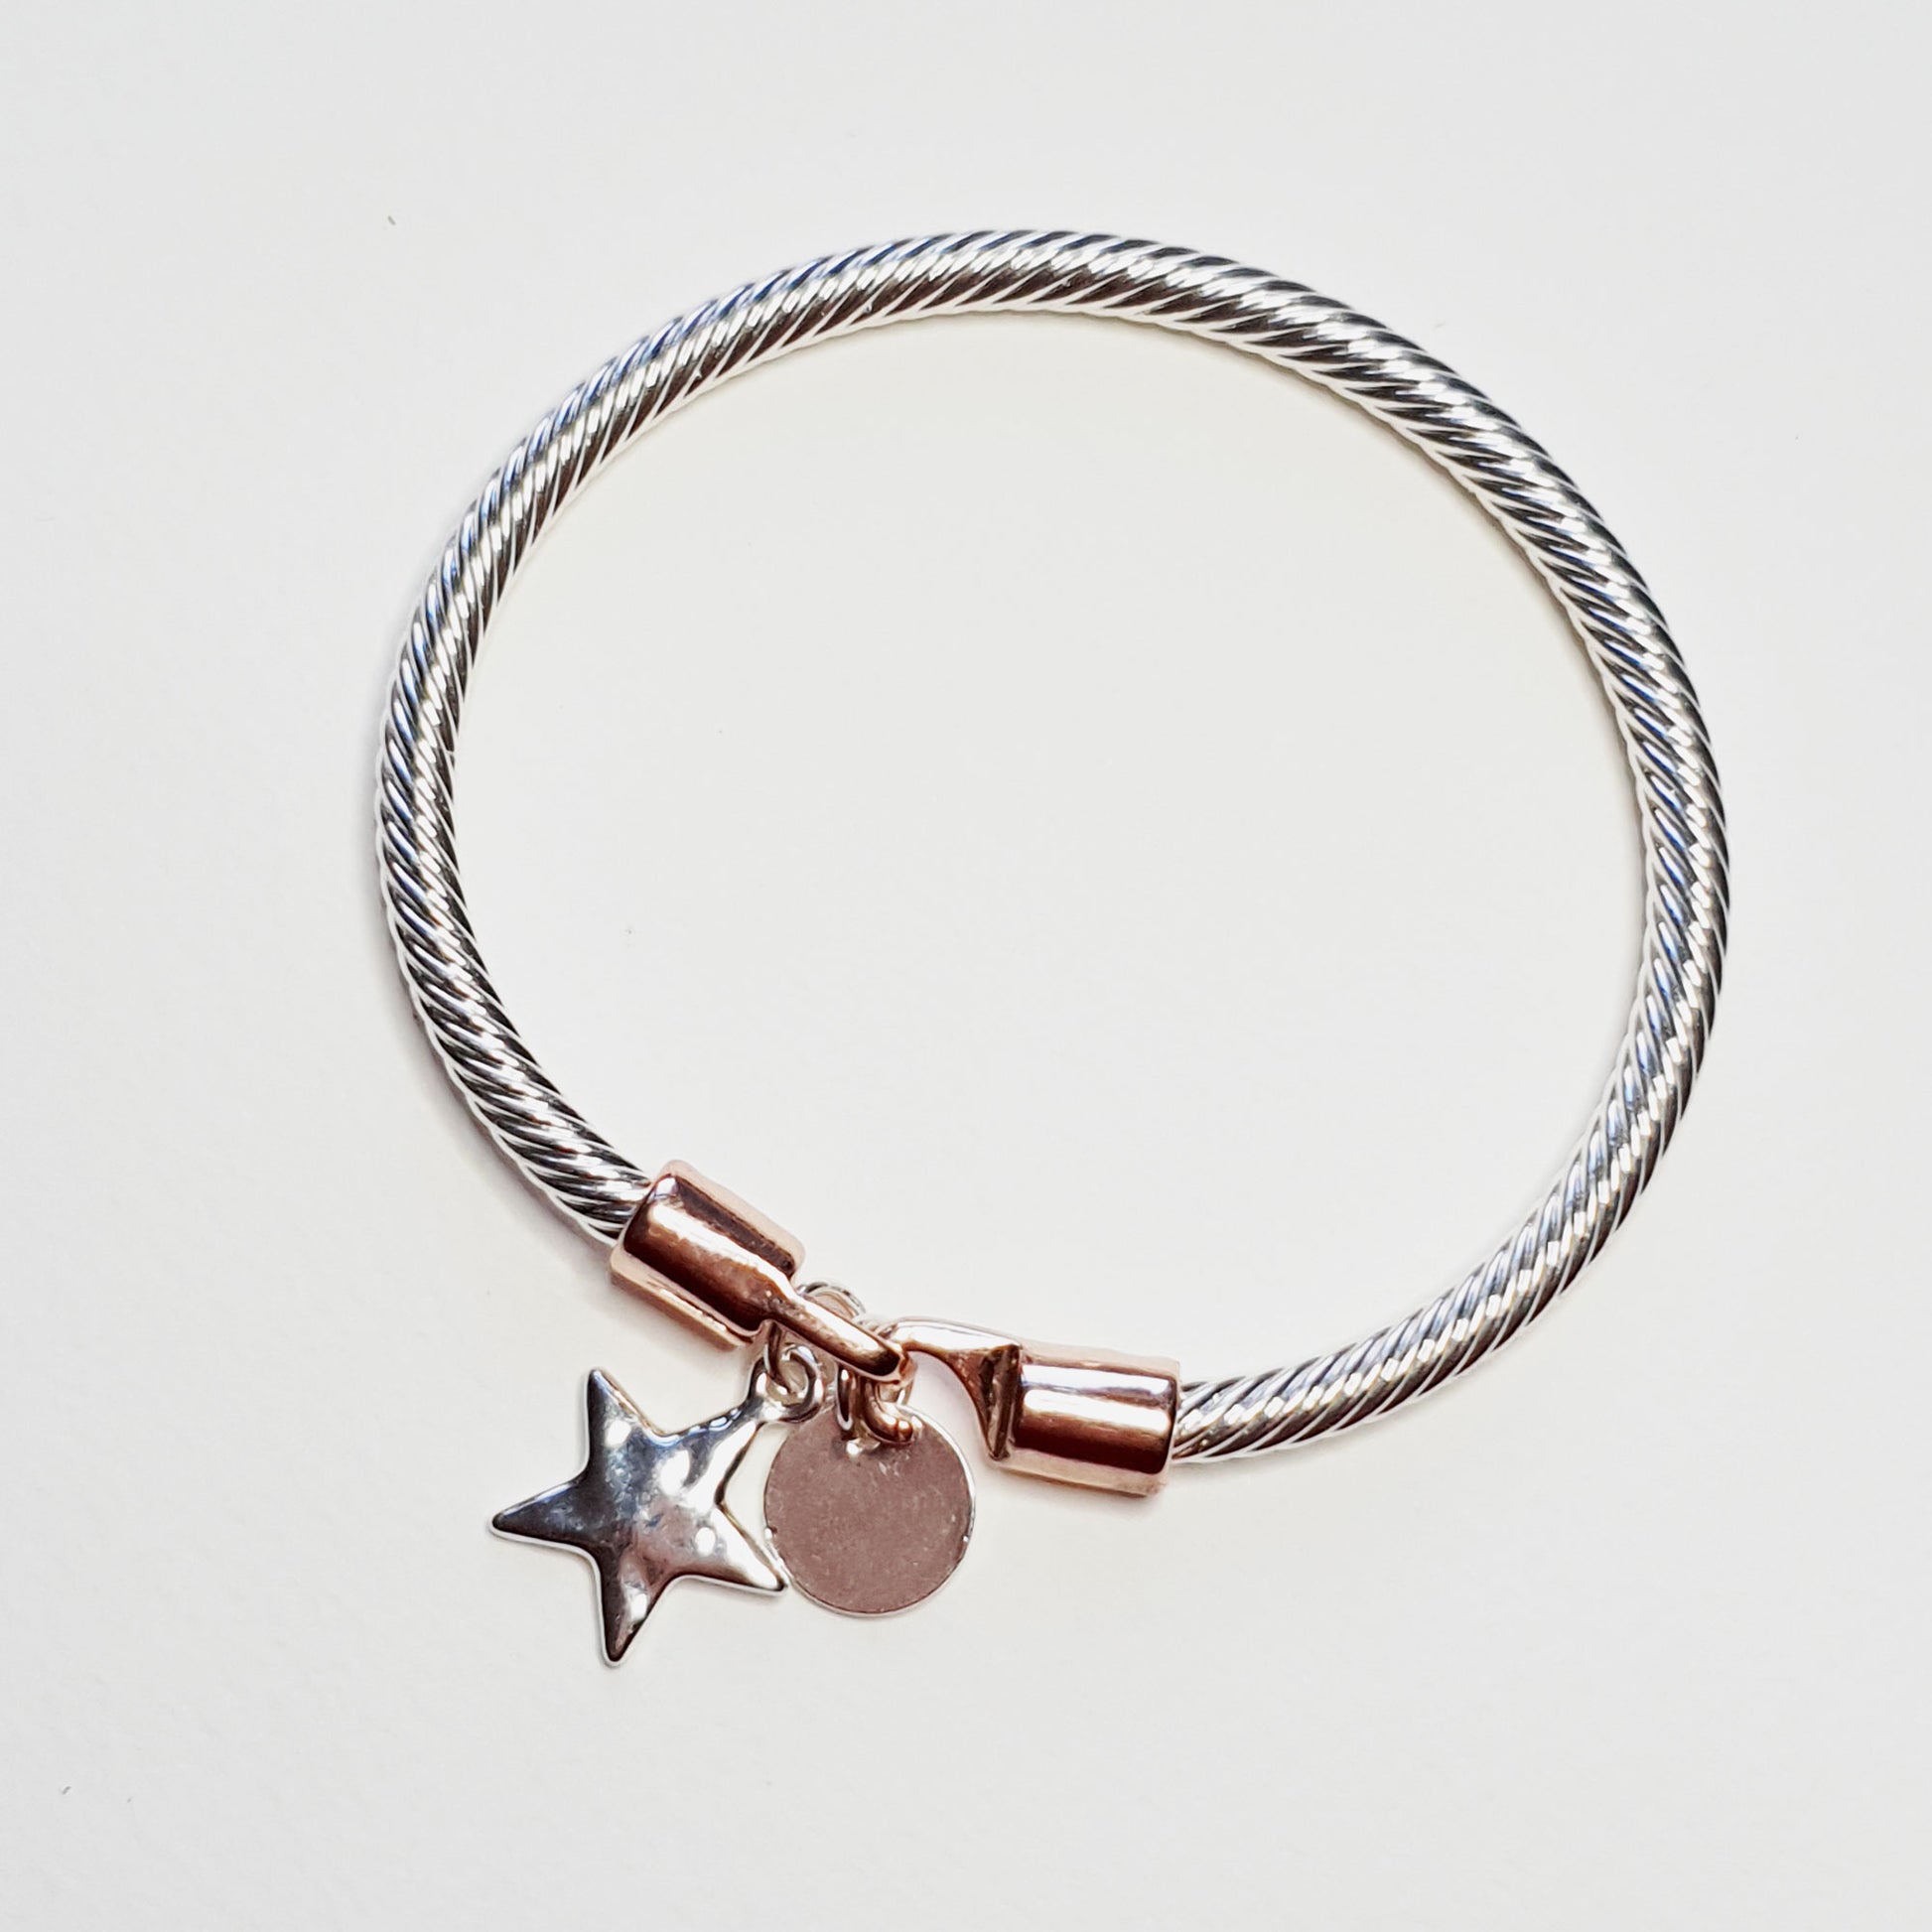 Twisted rope effect silver plated bangle with a charm on the rose gold plated clasp